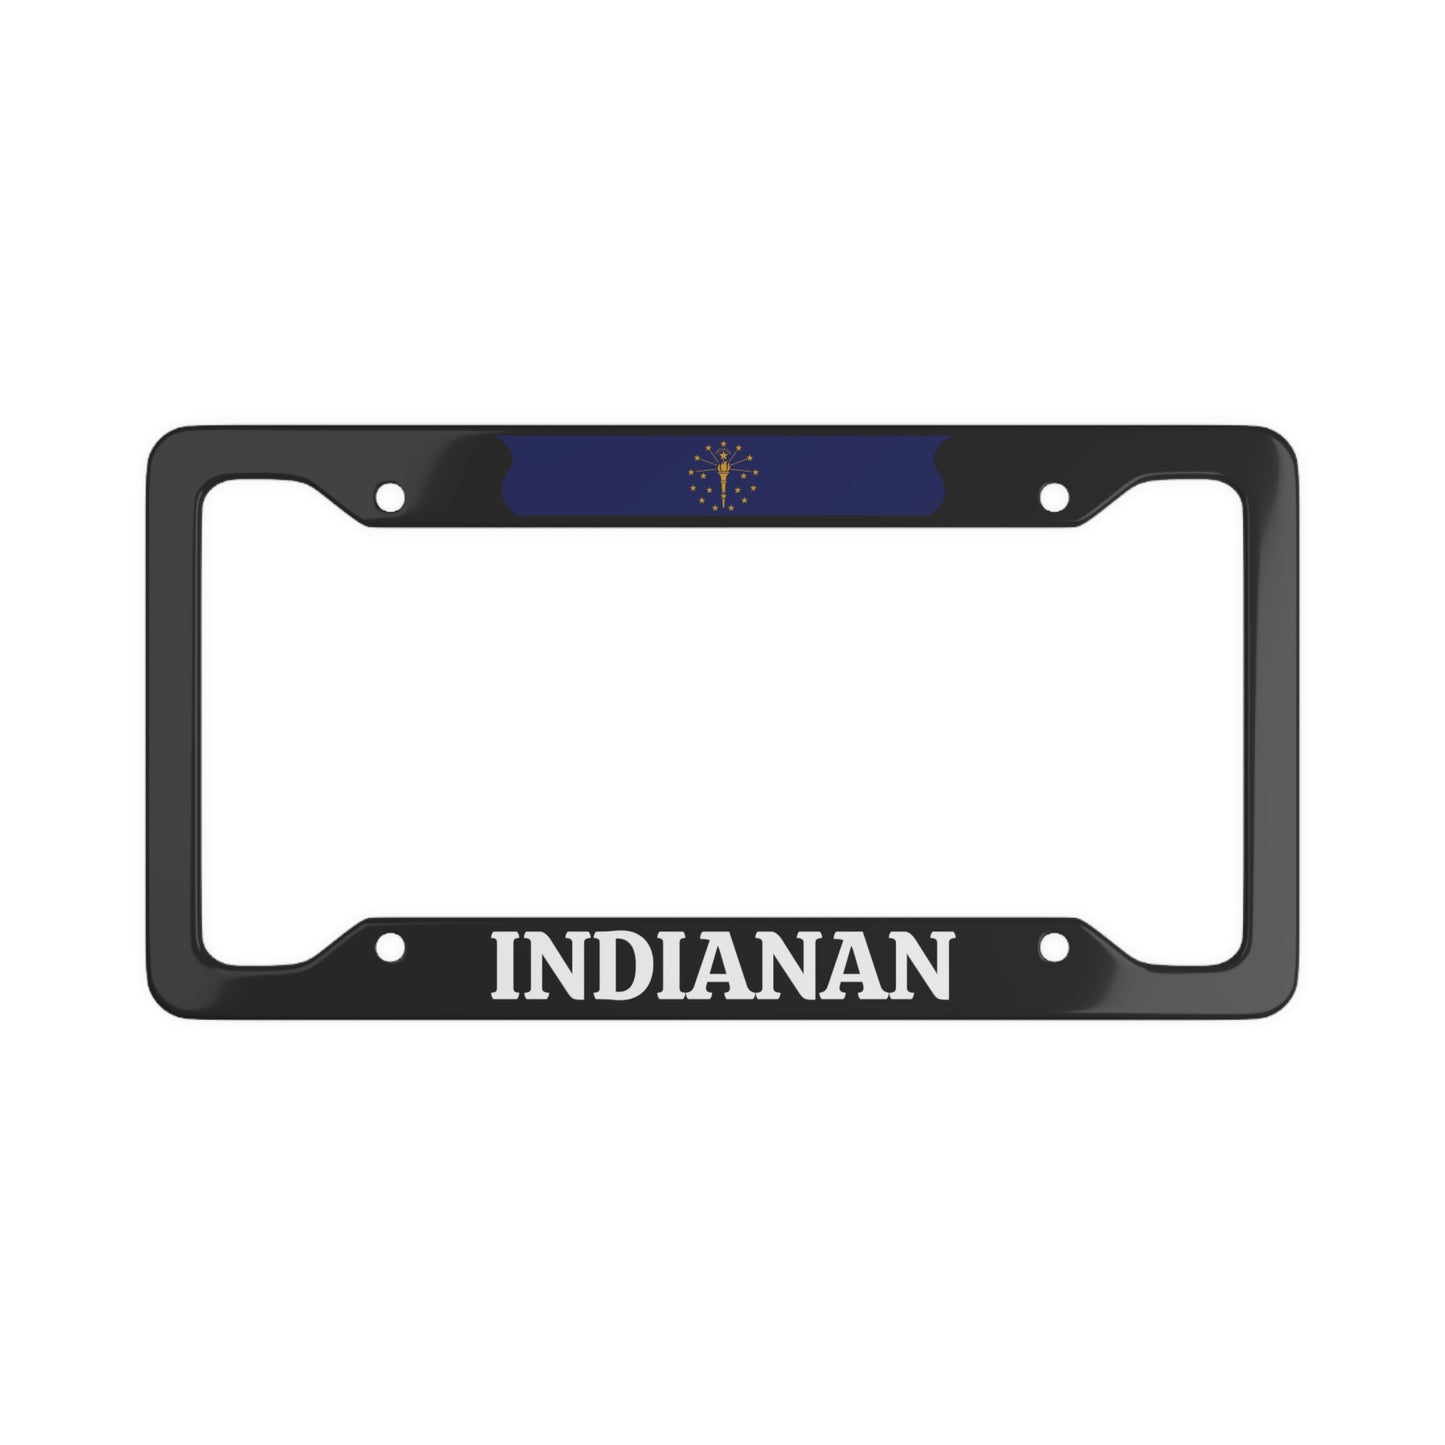 Indianan, Indiana State, USA License Plate Frame